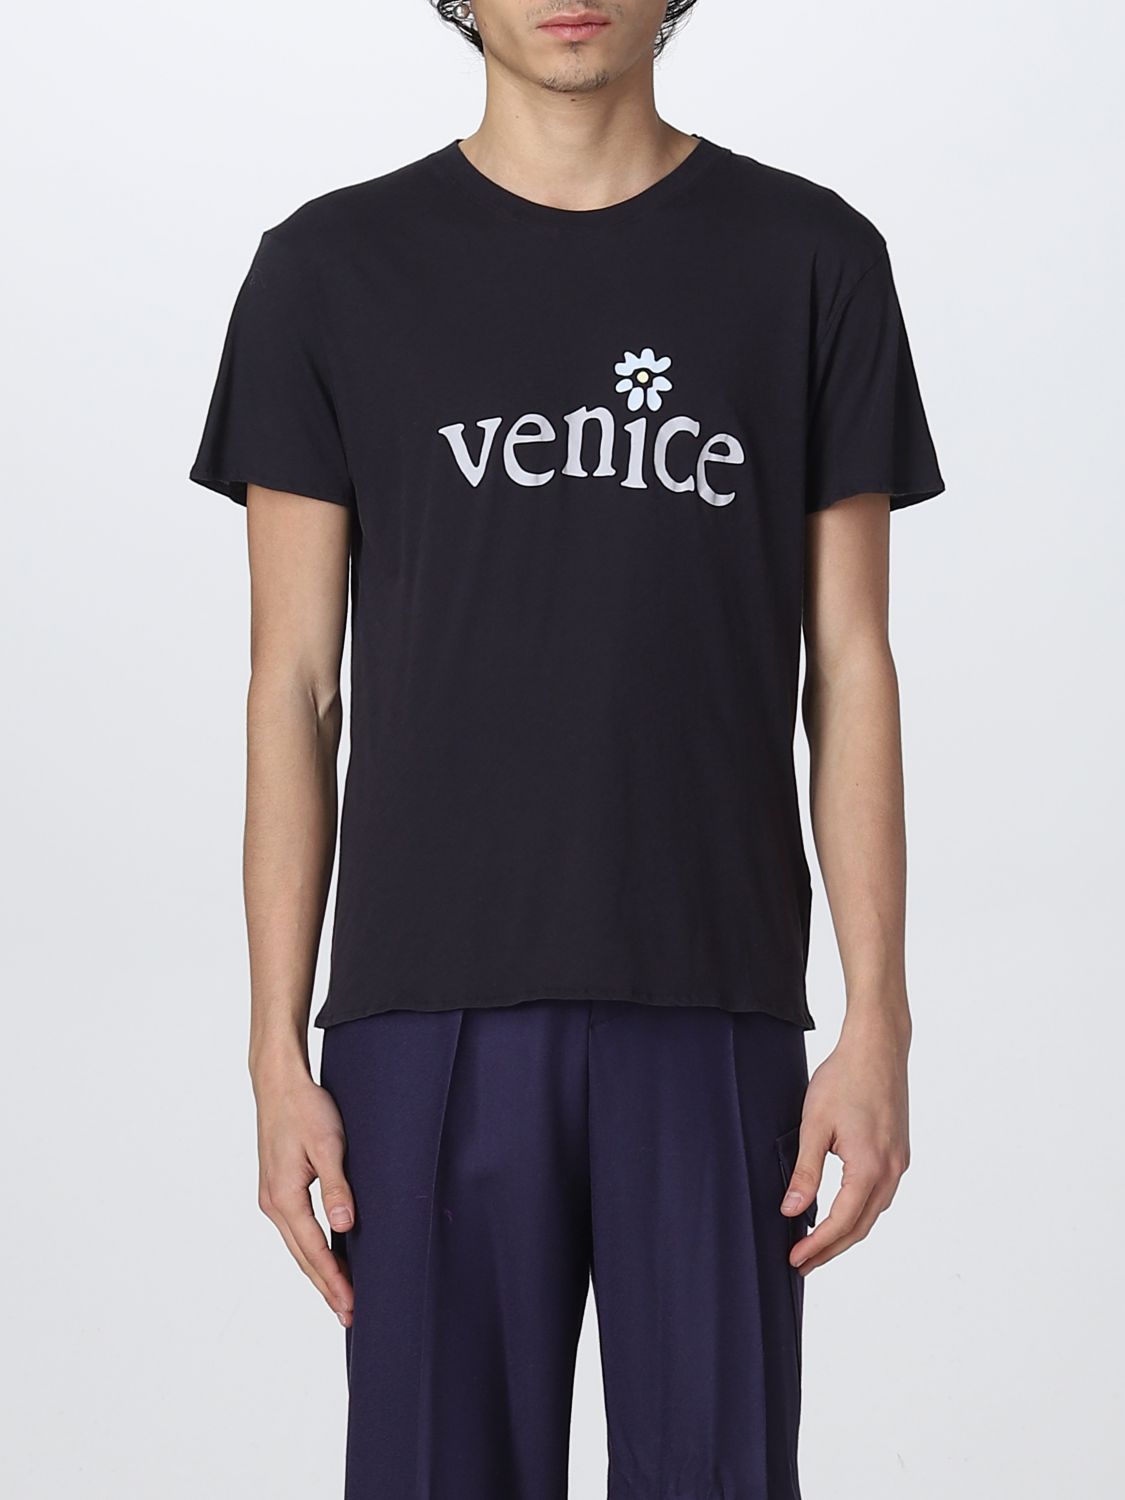 T-shirt Erl: T-shirt Erl con stampa venice nero 1